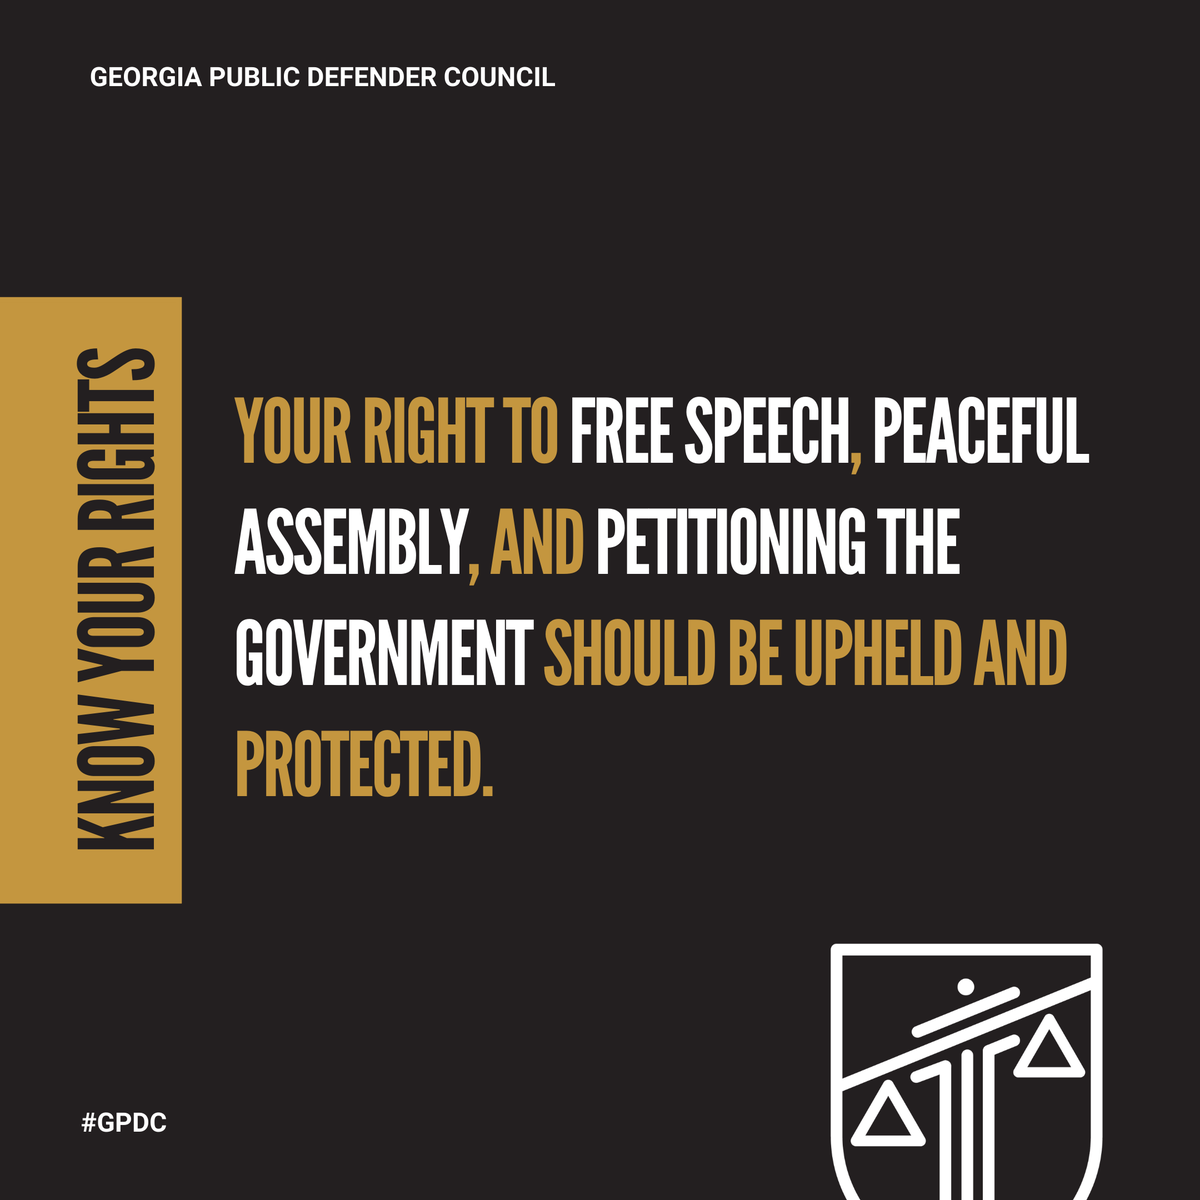 Exercising Your First Amendment: It's important to know and assert your rights. You have the right to free speech, peaceful assembly, and petitioning the government, which should be upheld and protected. Stay informed and empowered. #KnowYourRights #GAPublicDefender